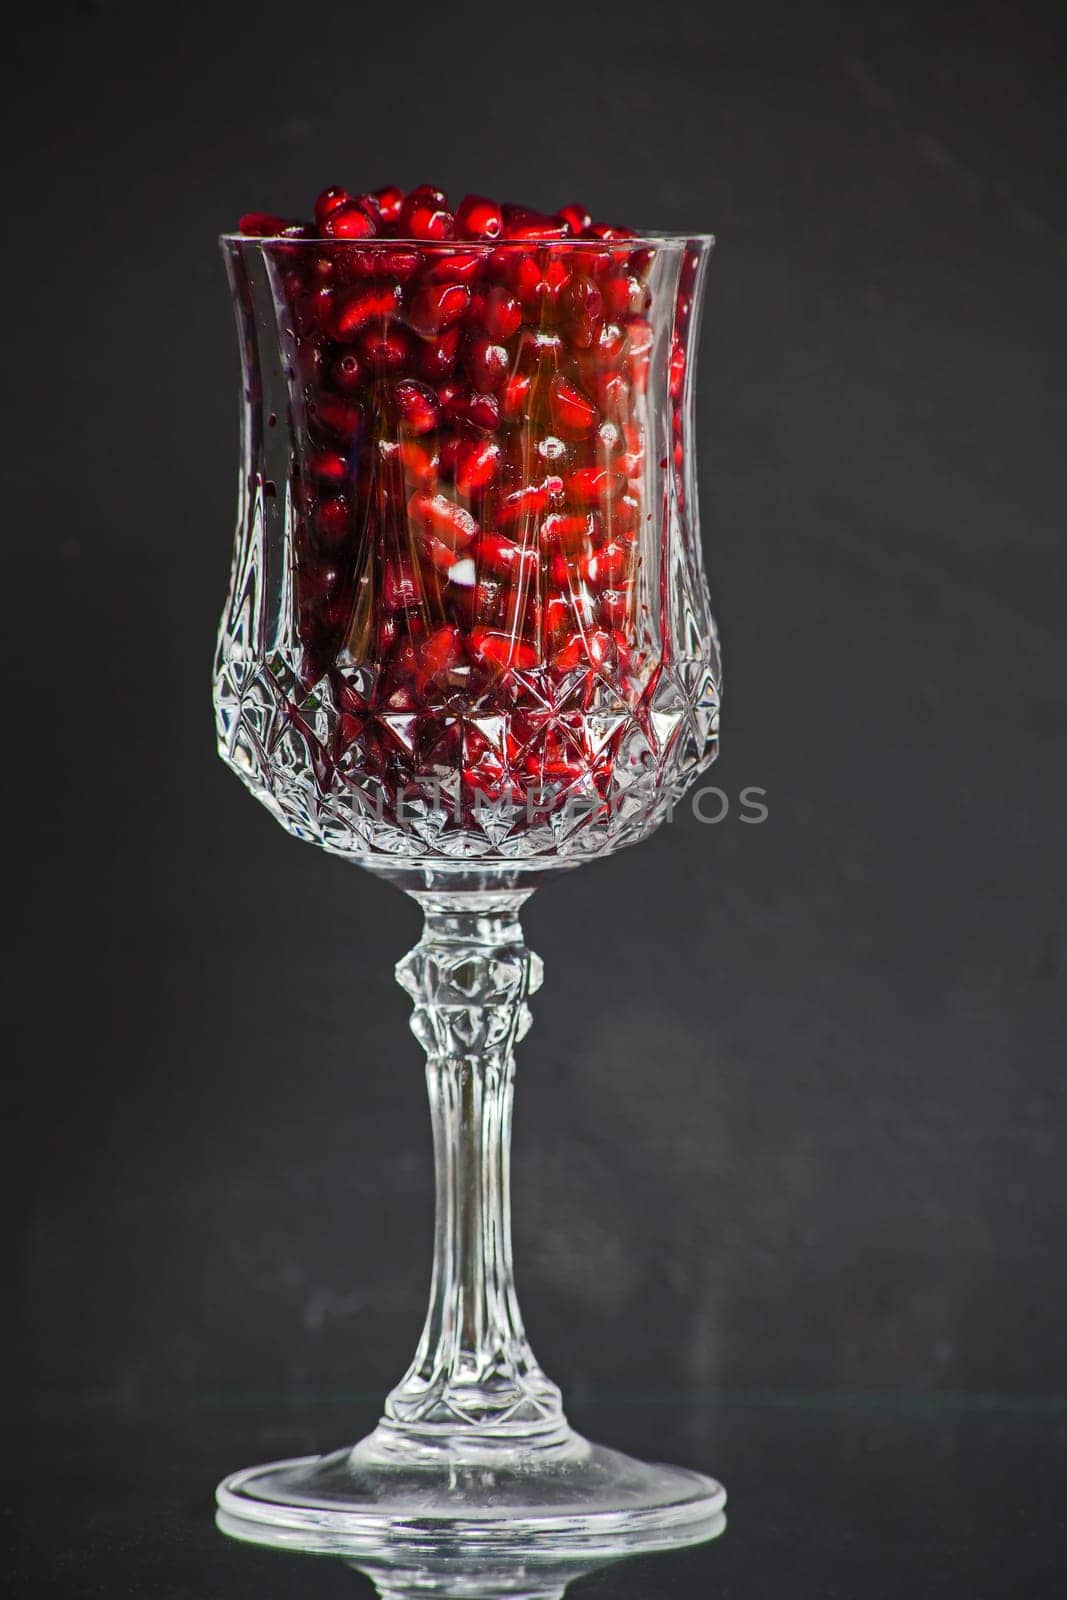 Still live of a single cut crystal glass filled with shiny pomegranitate seeds.